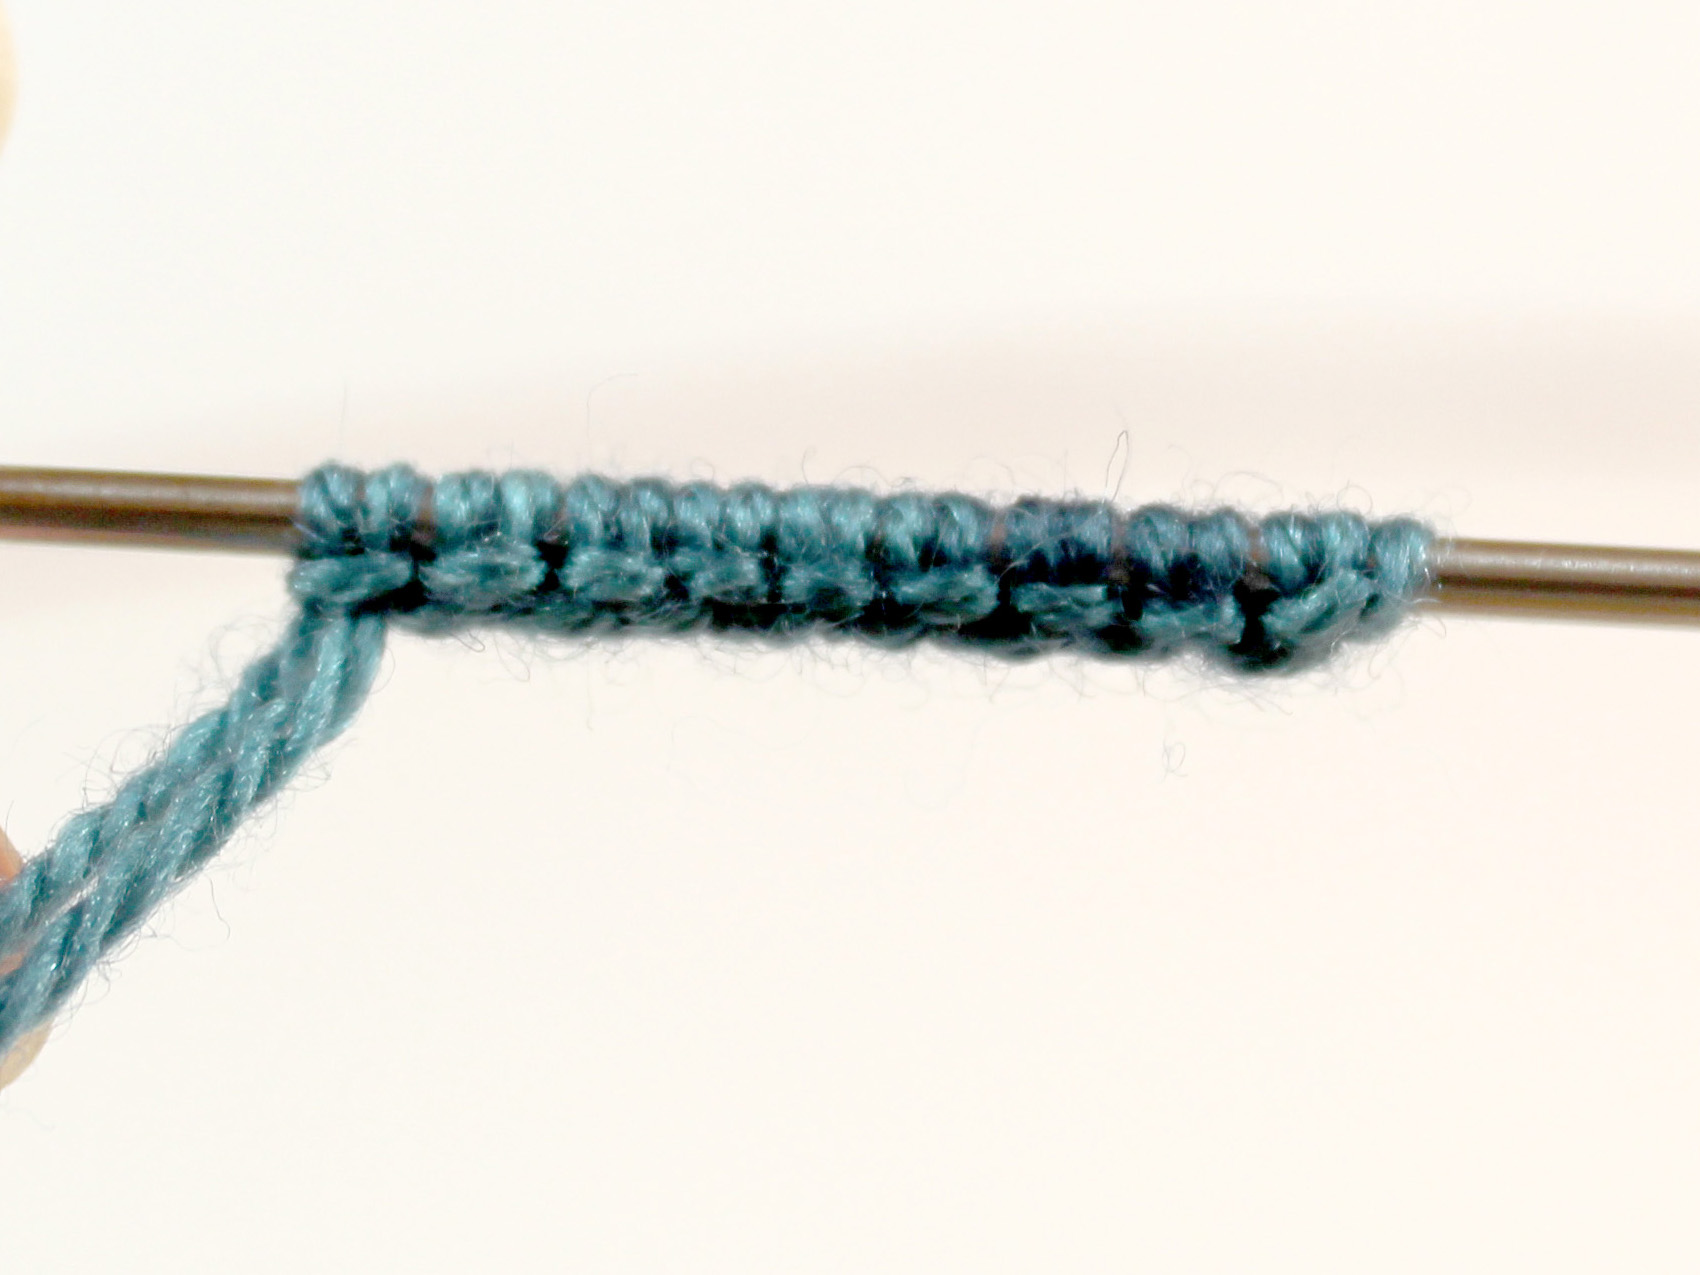 A cast-on on a needle with stitches arranged in pairs with a horizontal band of yarn wrapped around them.